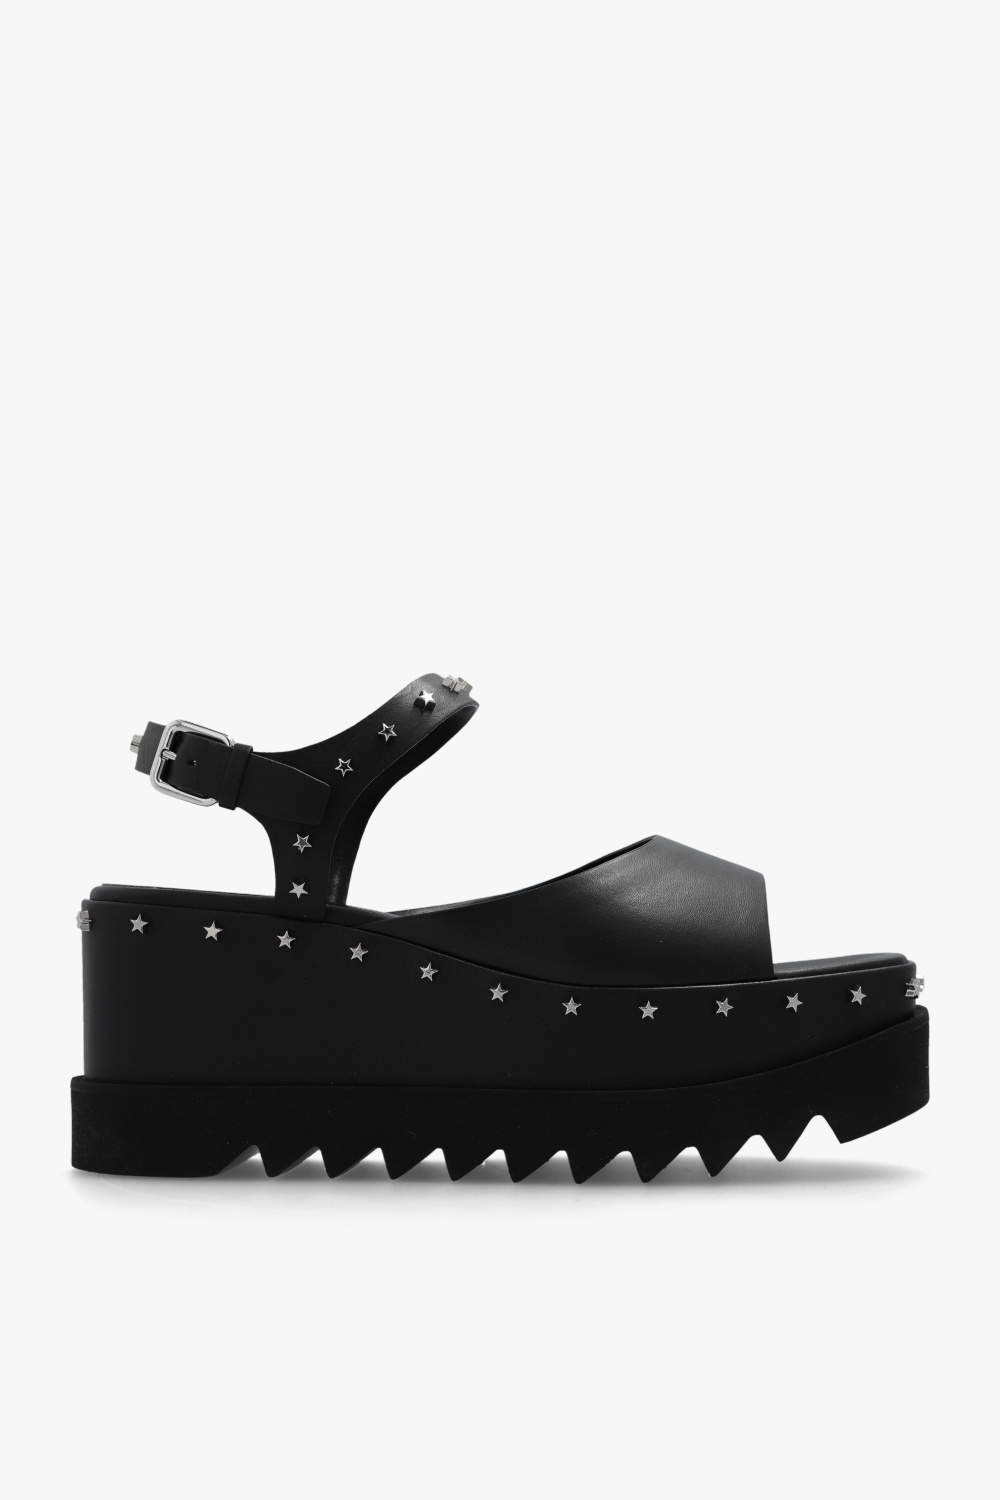 Stella McCartney Slippers and clogs elyse Women 810150W1DX01000 Eco Leather  Black 556€